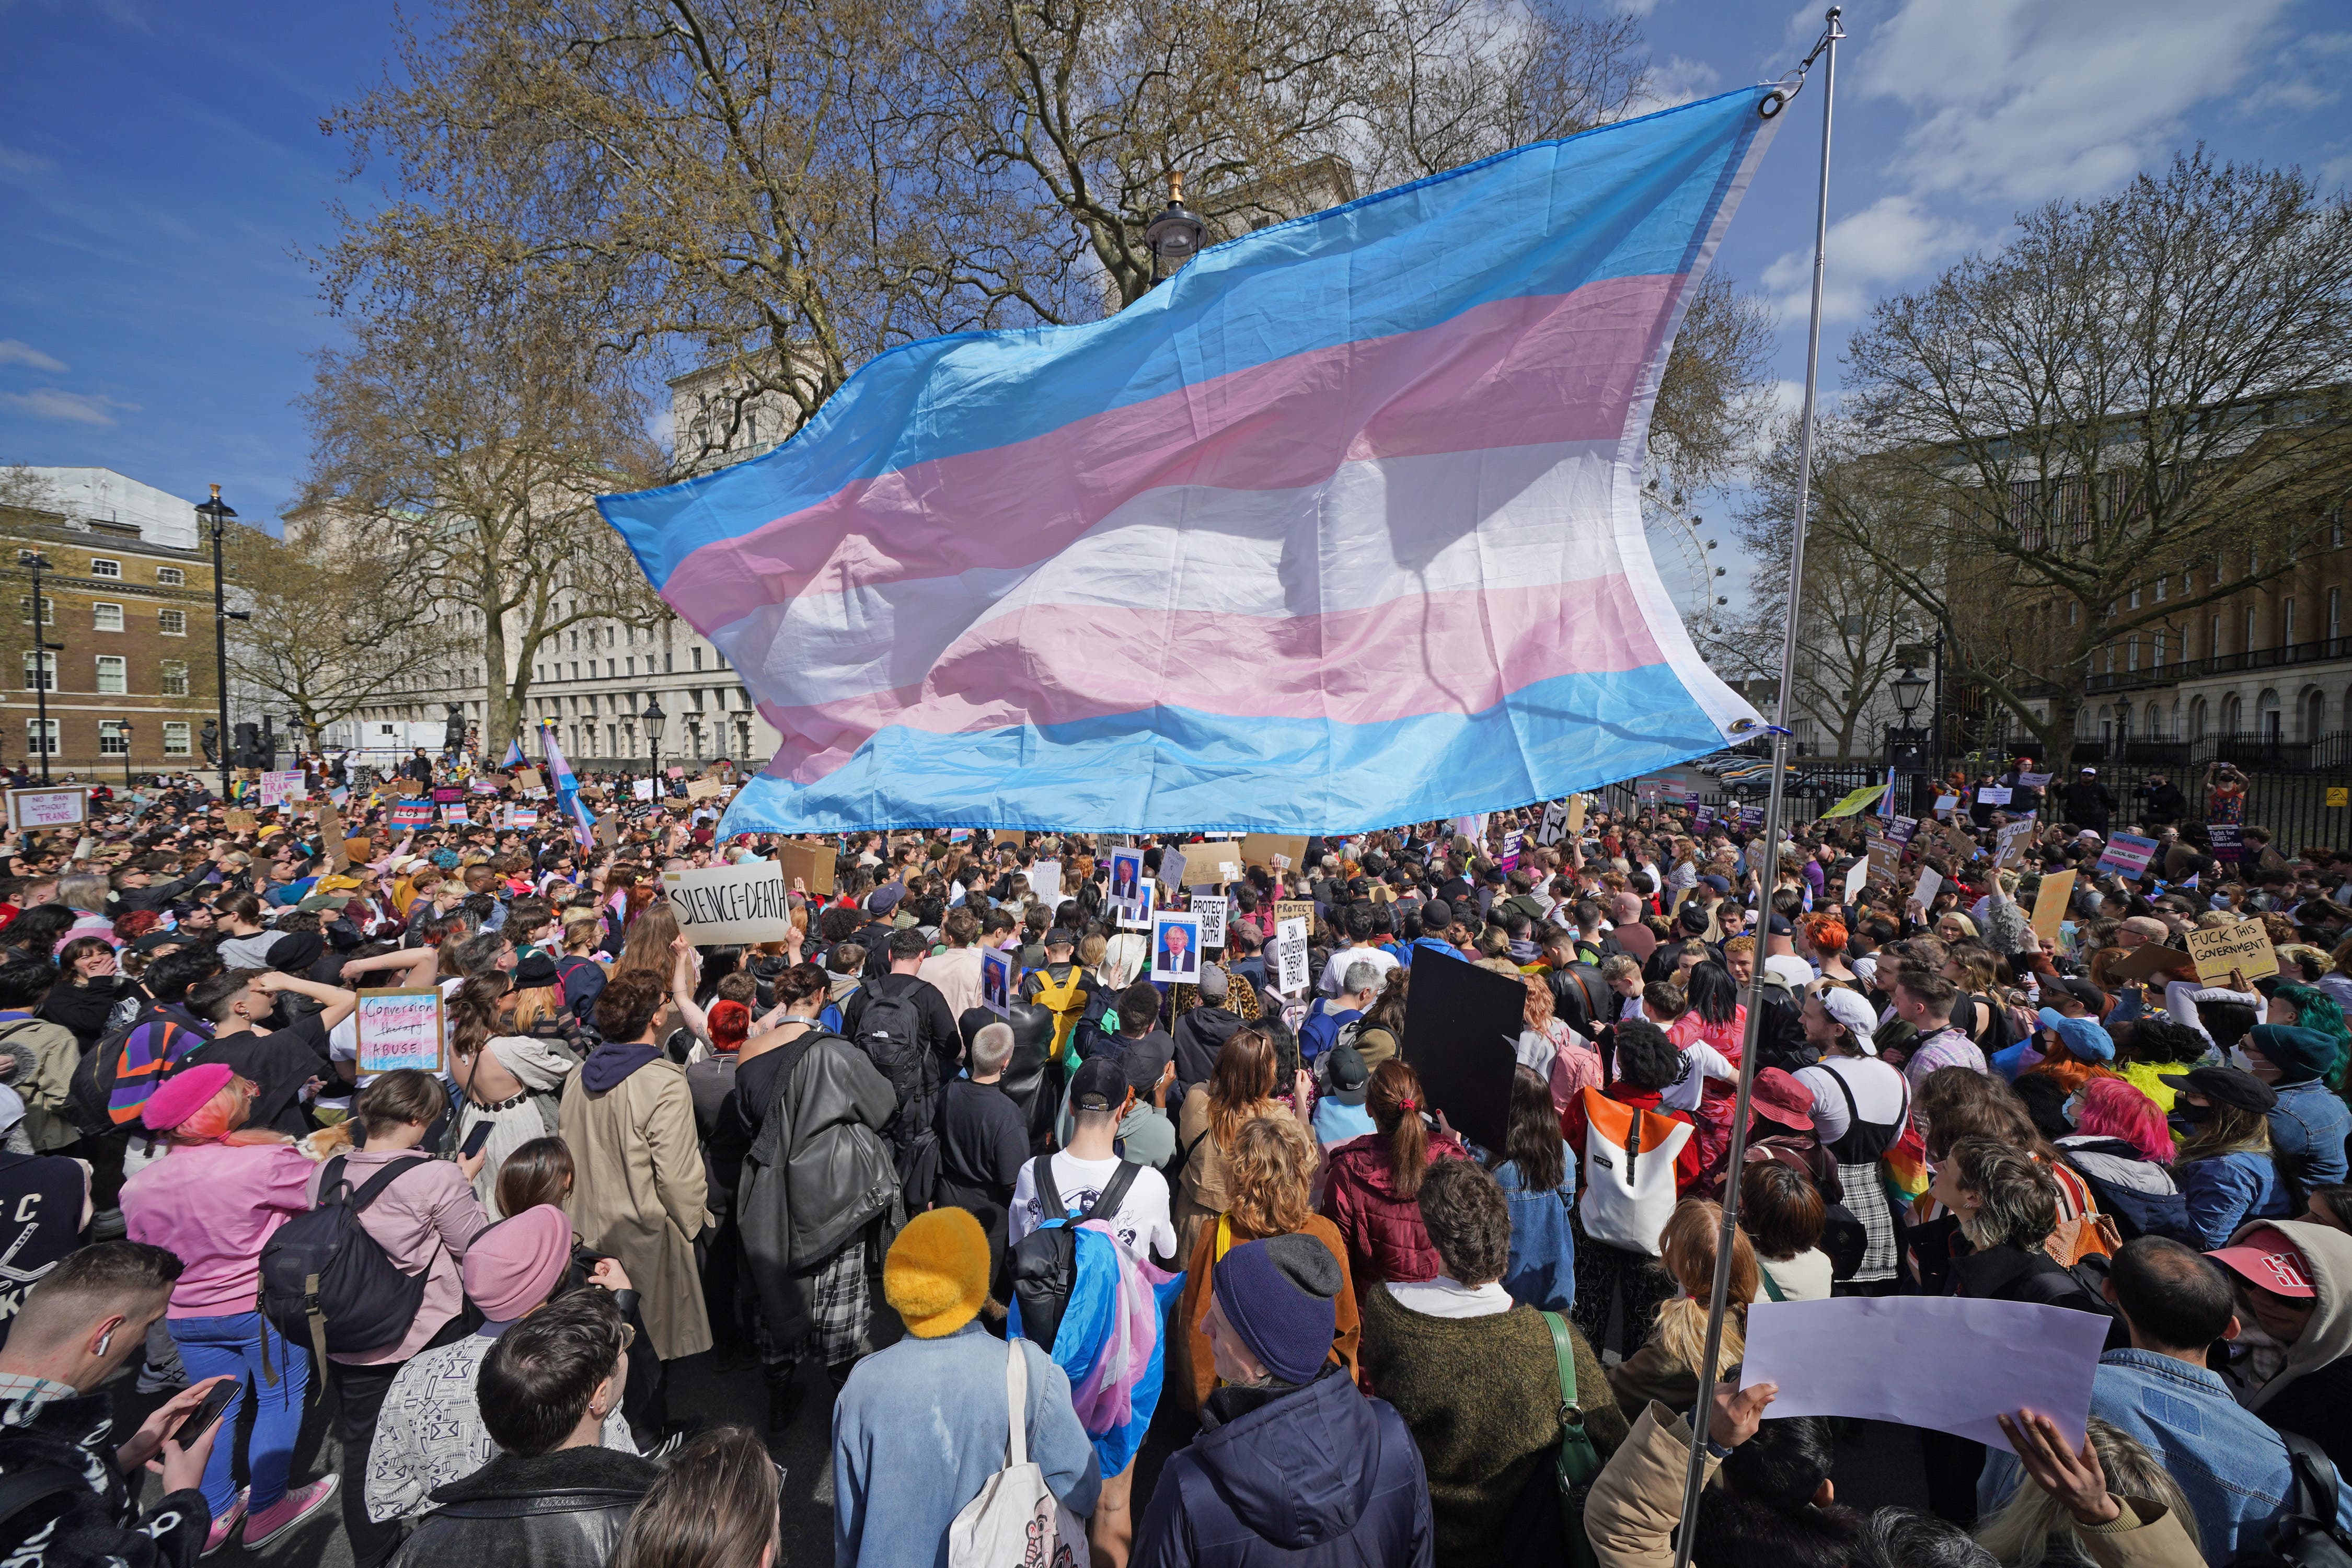 Campaigners have lost a High Court challenge against NHS England over waiting times for gender dysphoria treatment (Yui Mok/PA)